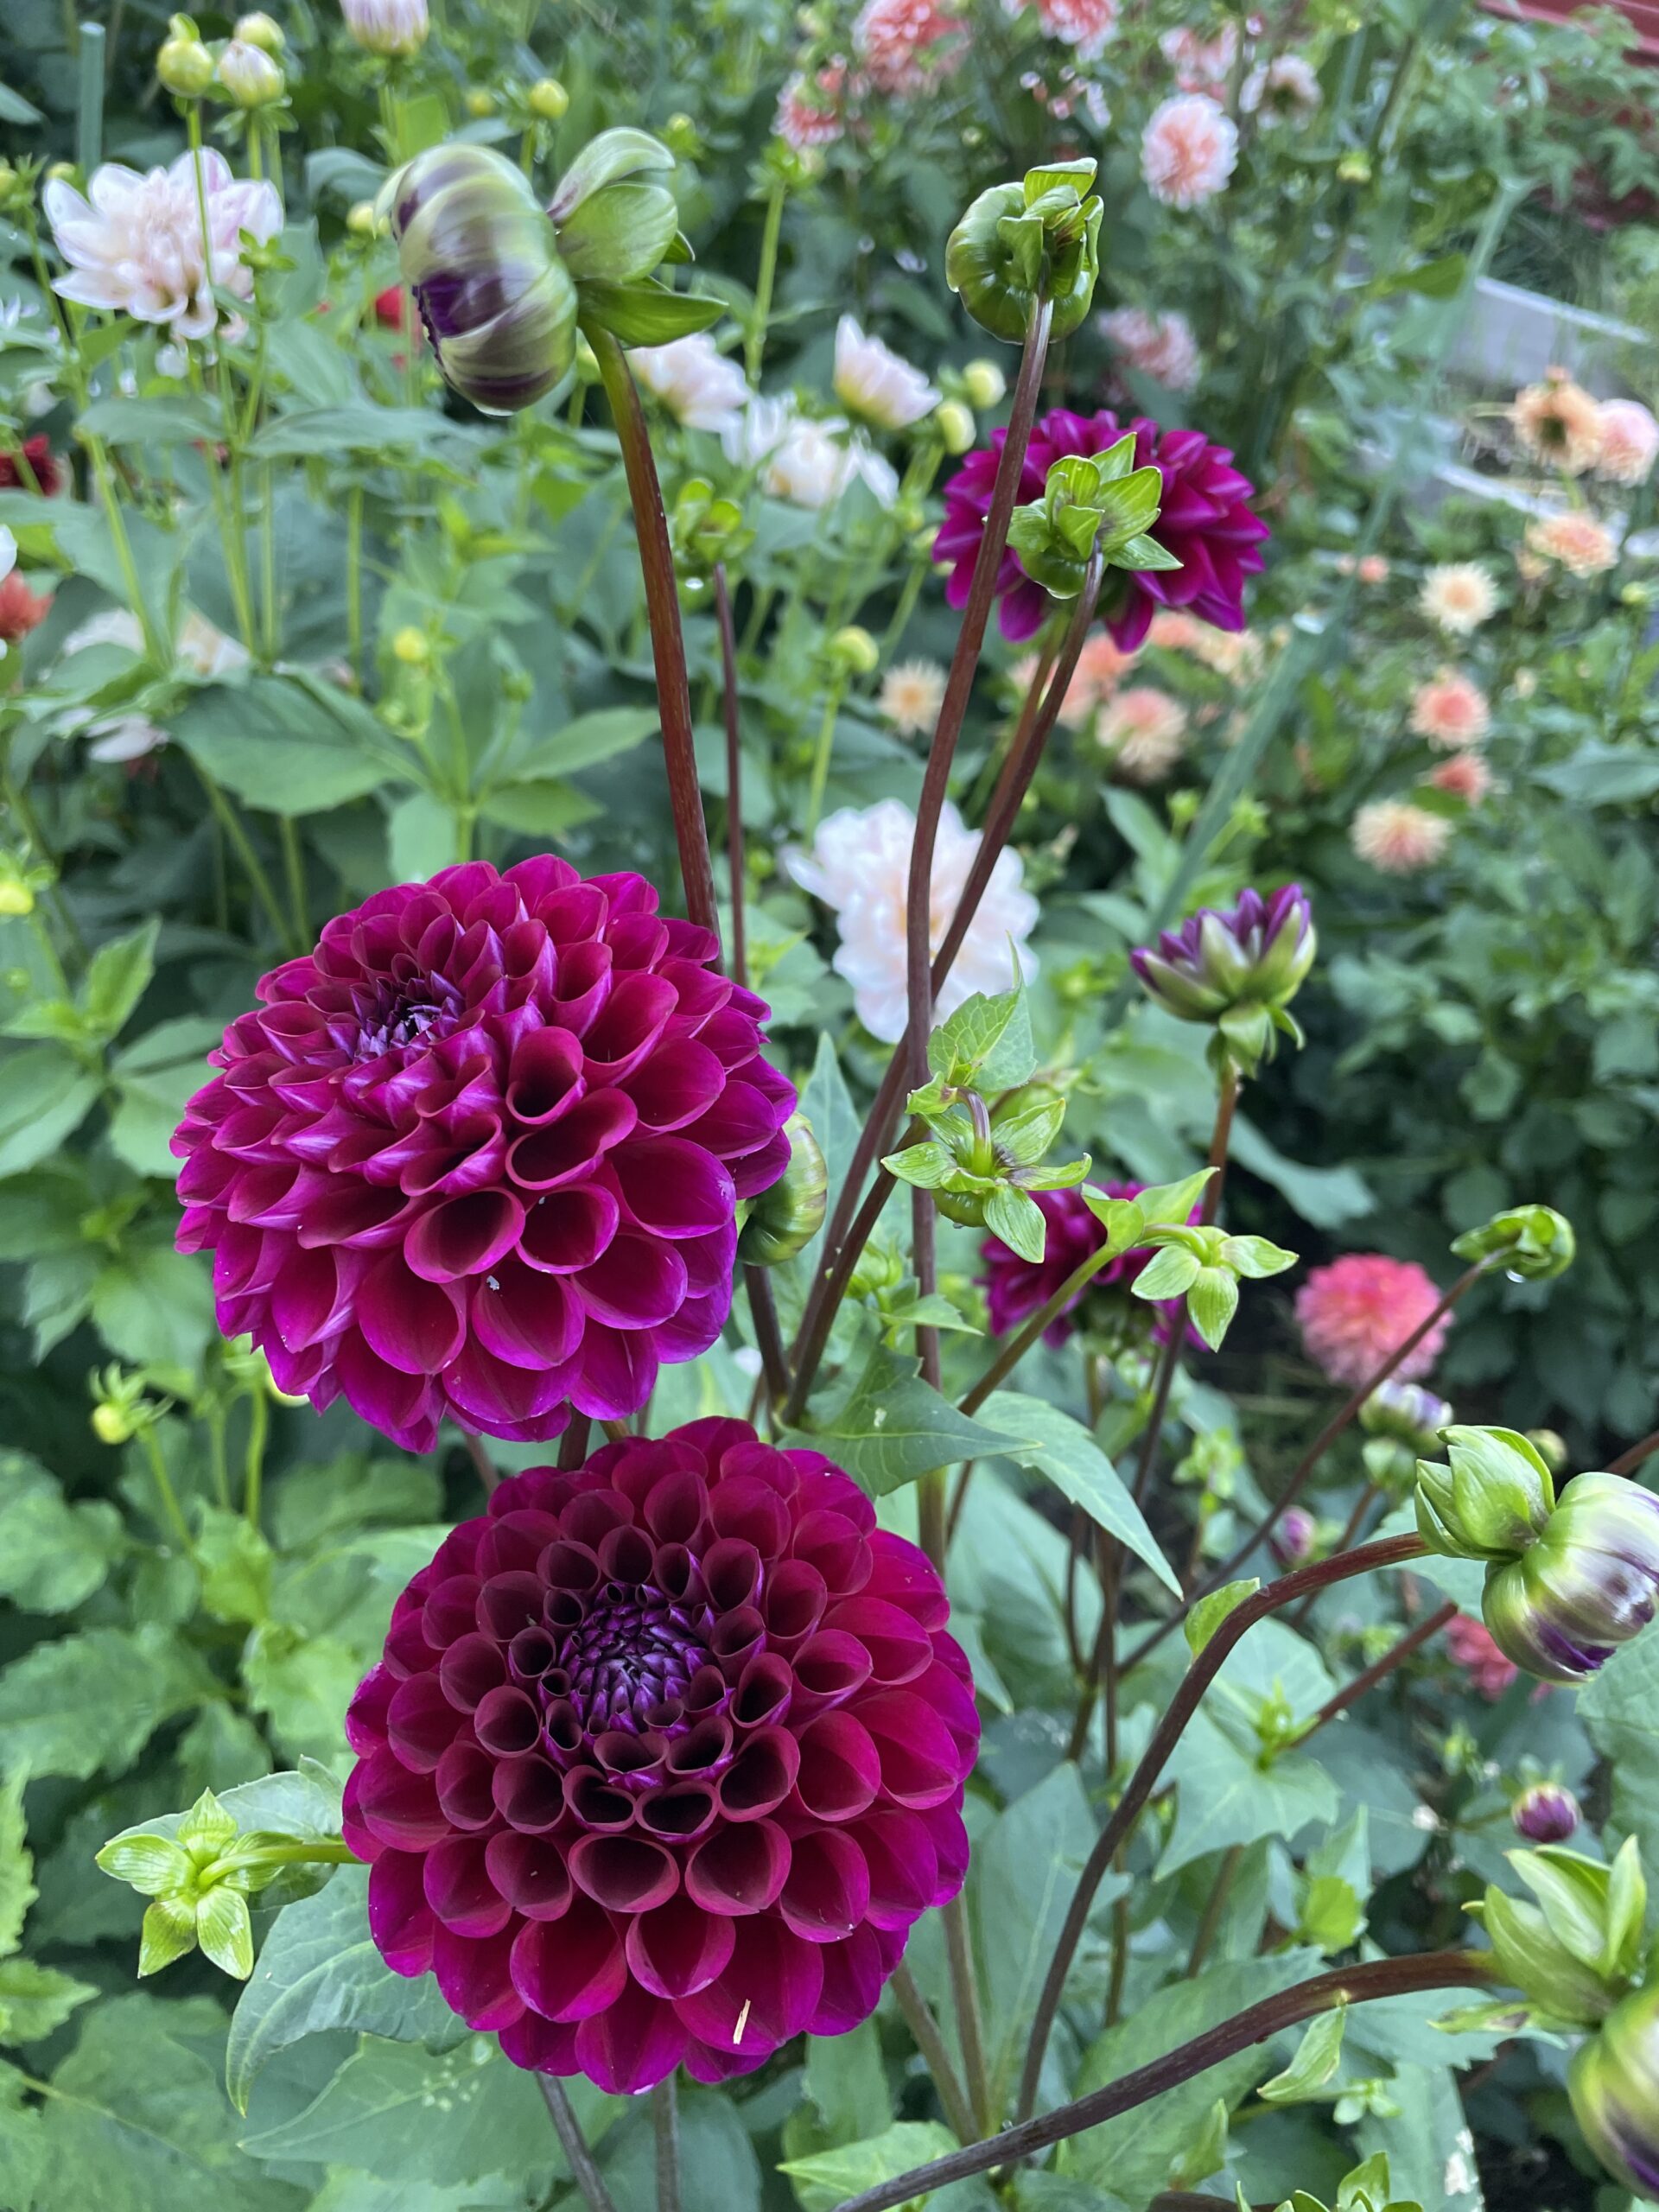 The best image to show the darker purple hues of the Jason Matthews Dahlias, this image has two blooms in the foreground and green plant in the back ground.